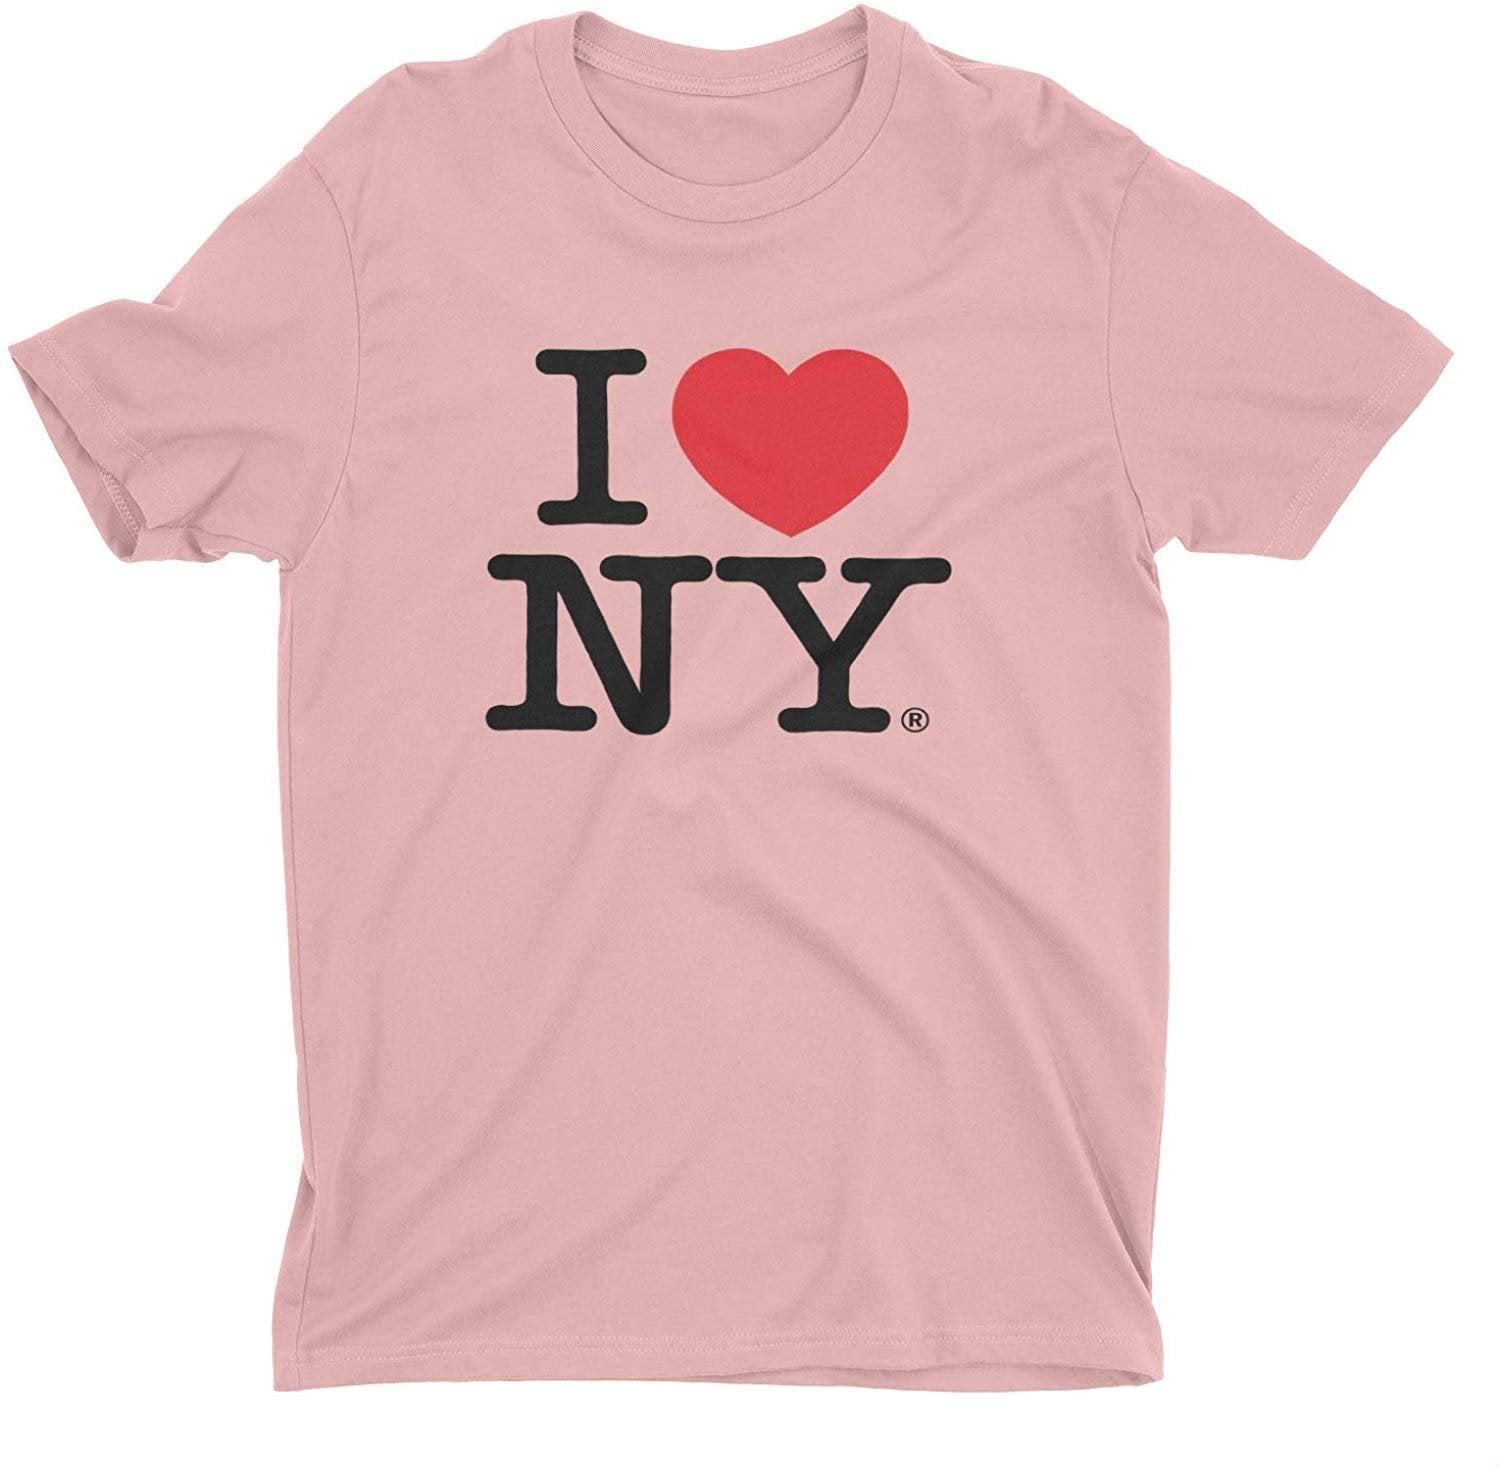 I Love NY Kids T-Shirt Officially Licensed Unisex Tees (Youth, Pink)